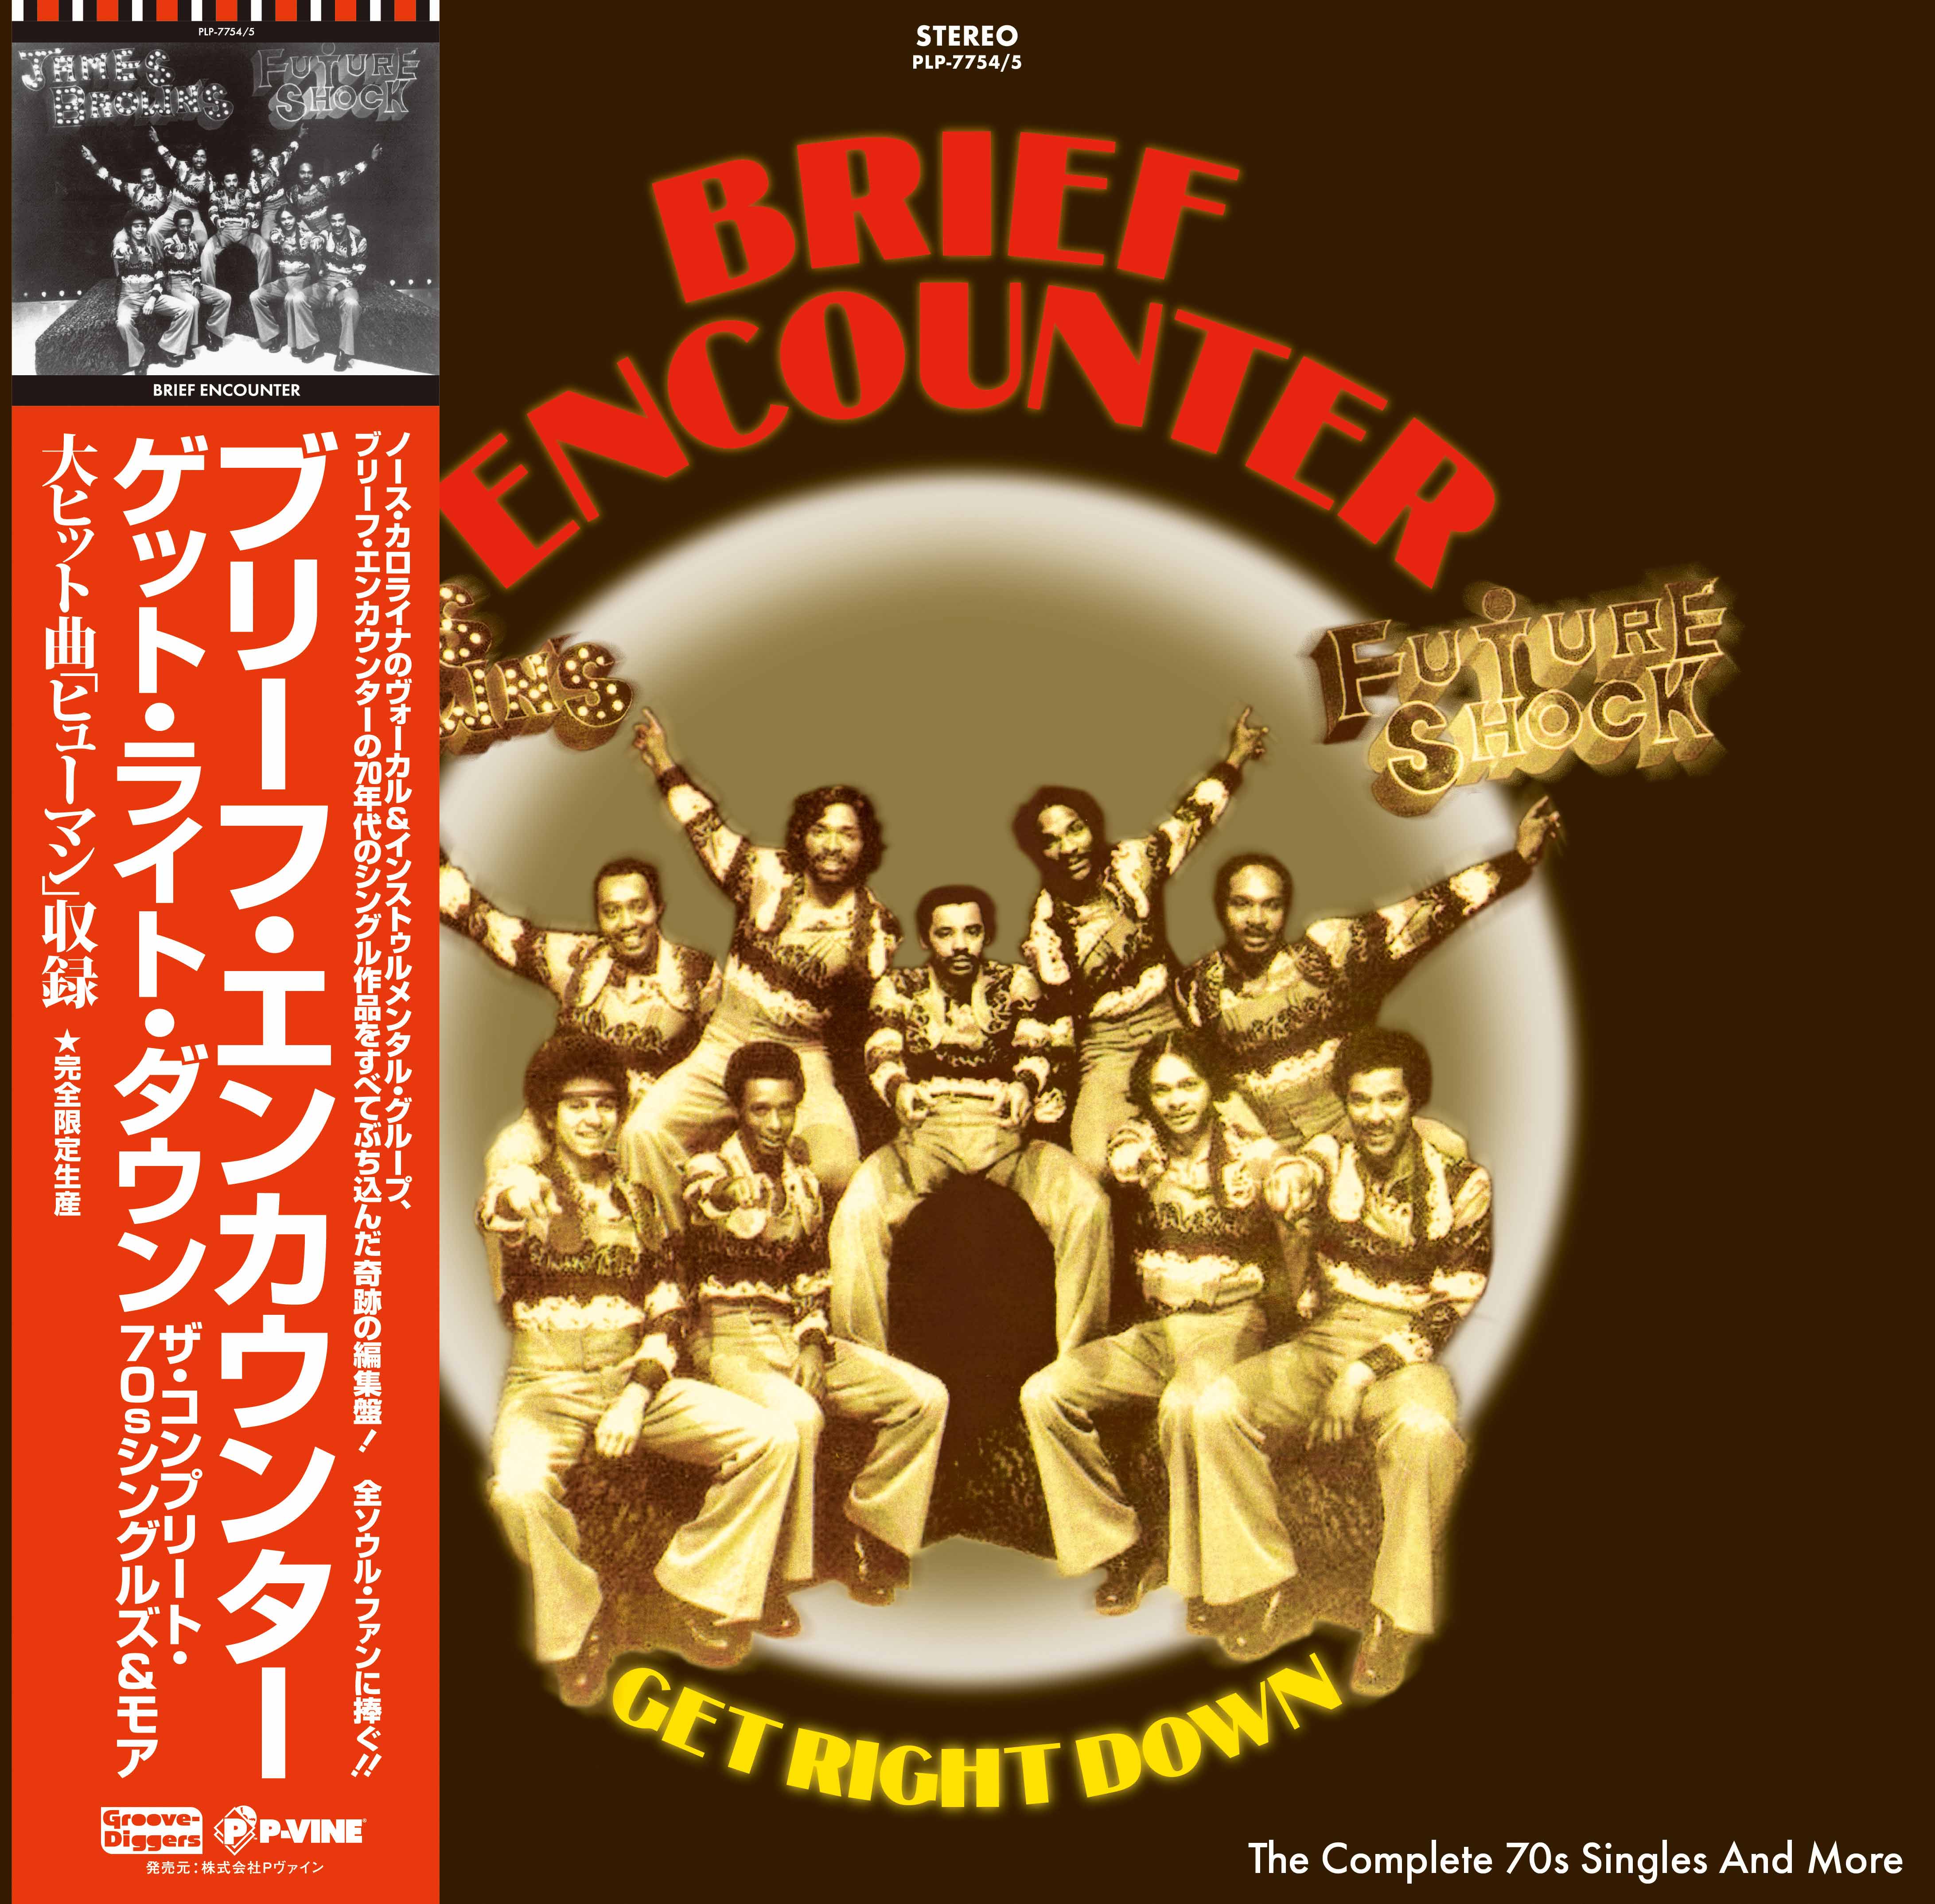 THE BRIEF ENCOUNTER「Get Right Down - The Complete 70s Singles And More」